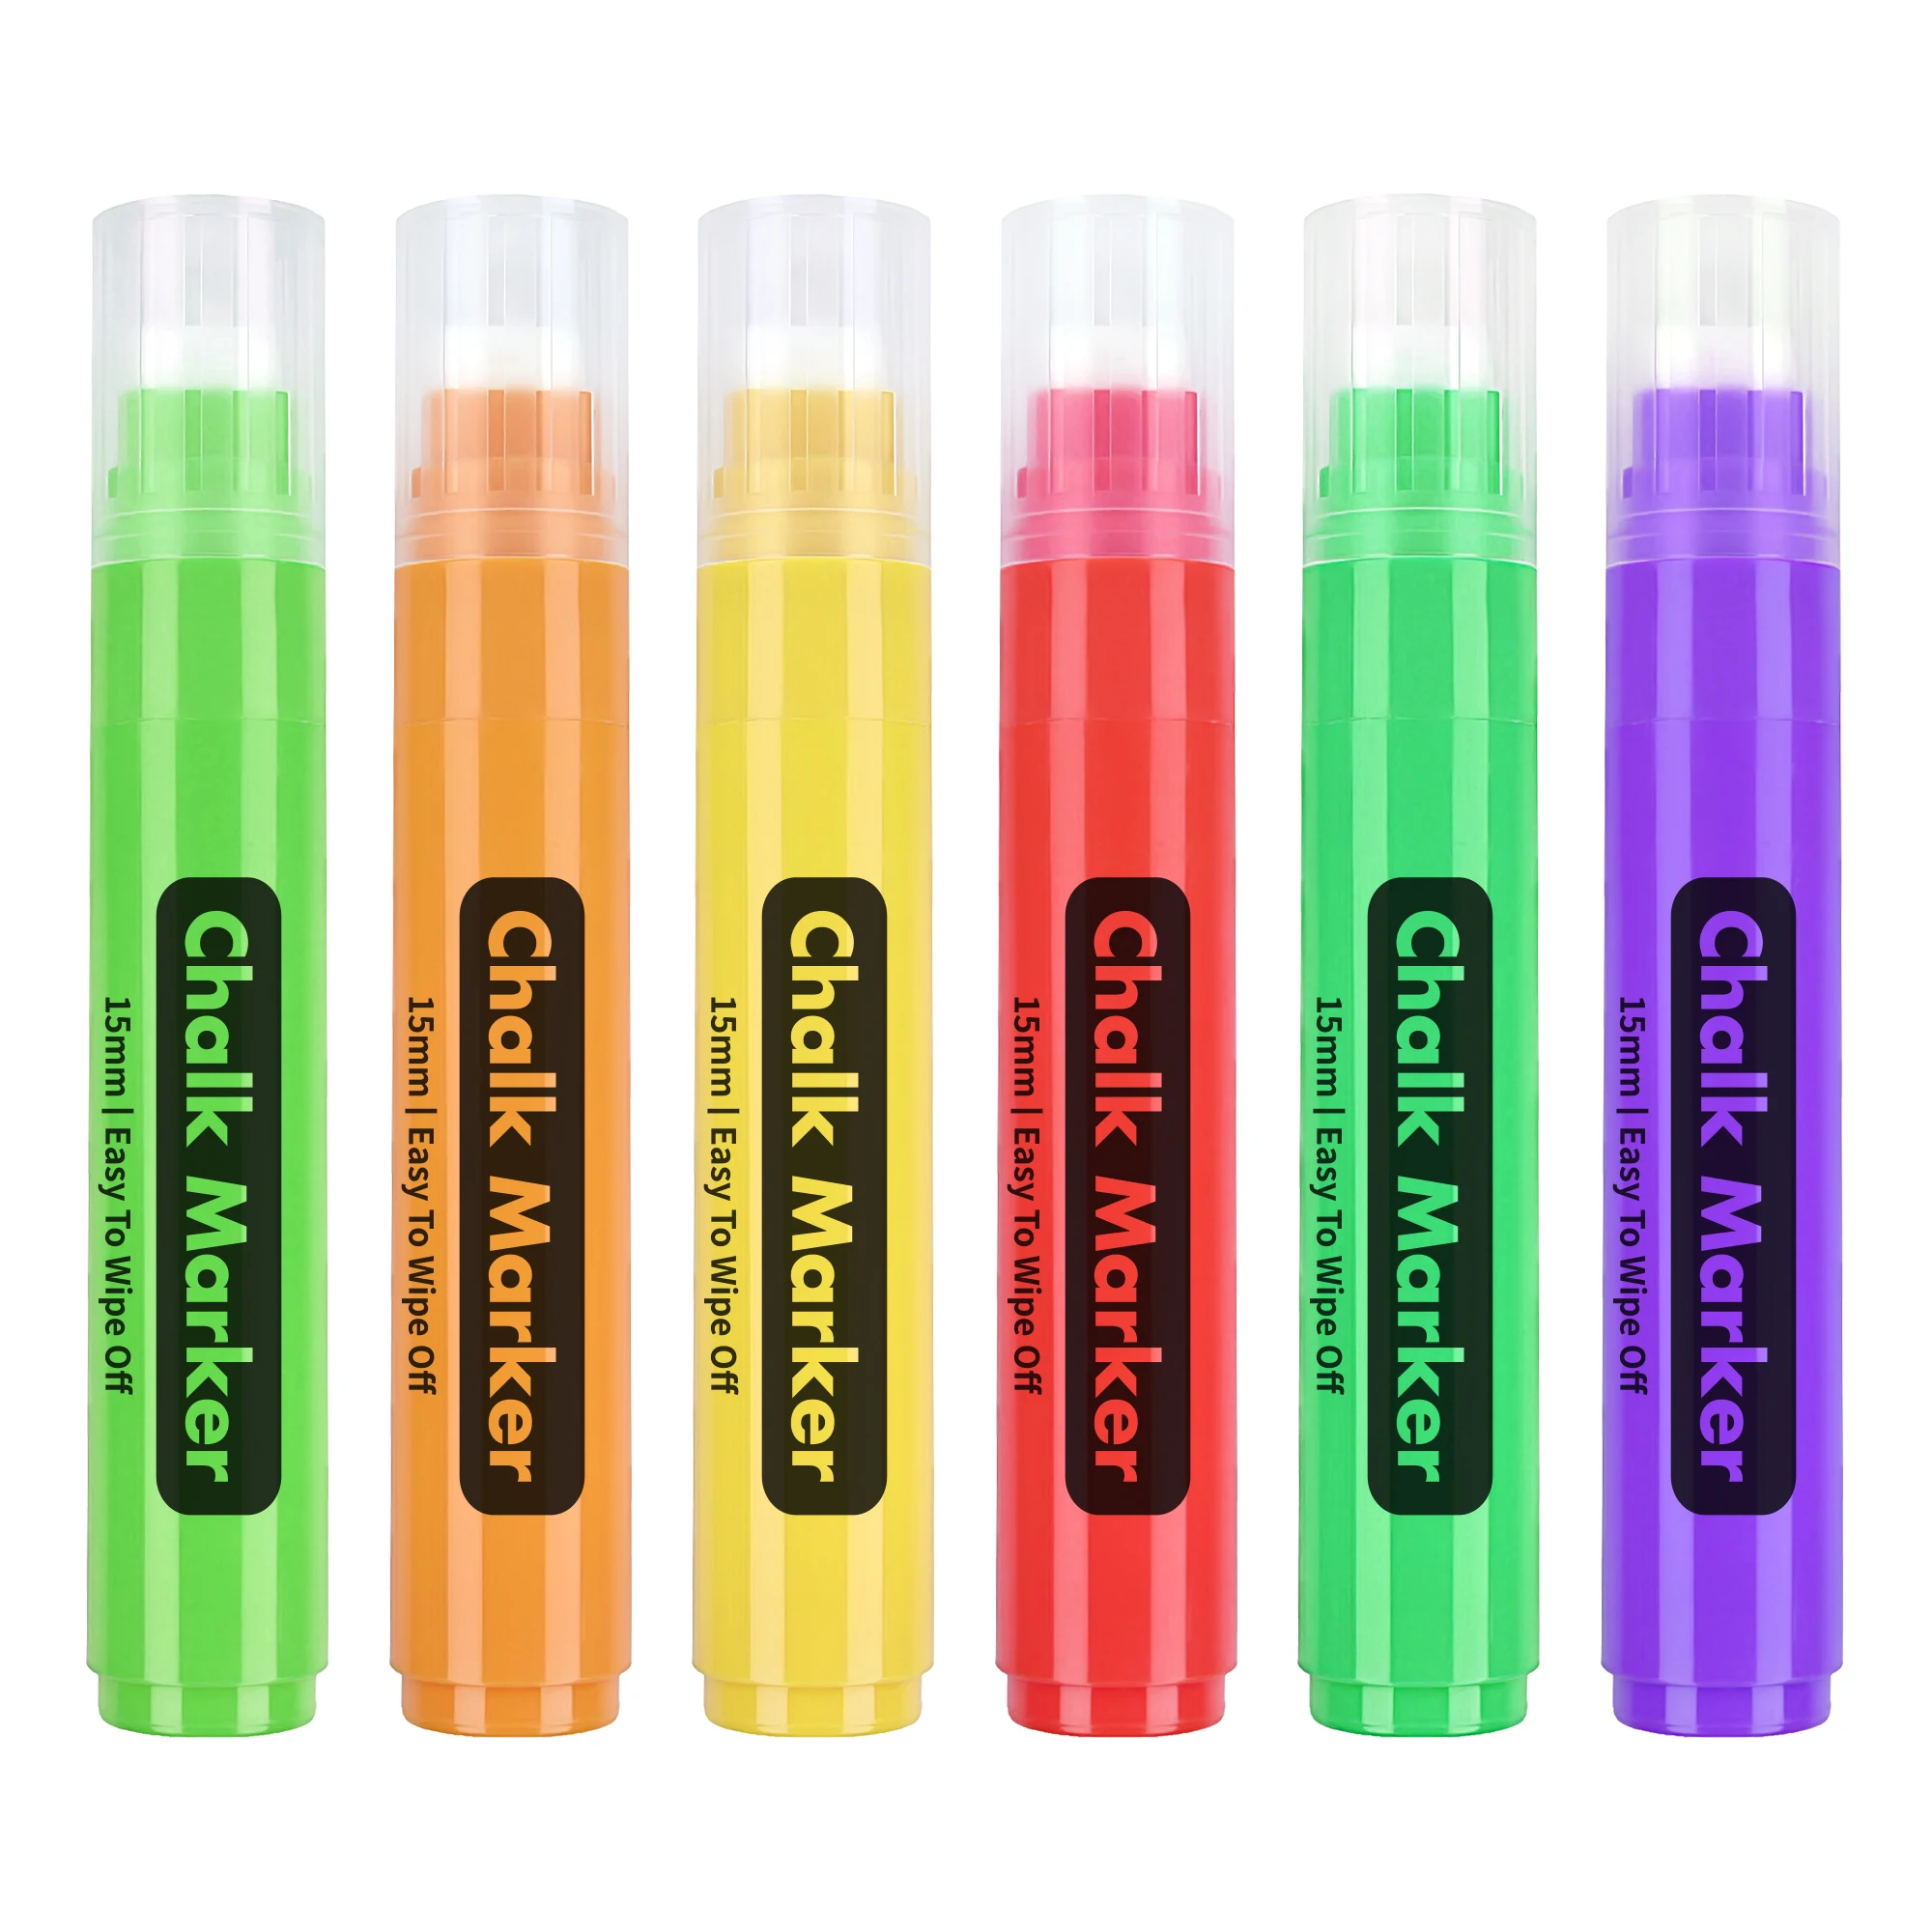 Acrylic Paint Markers, 15mm Felt Tip Jumbo Markers, 12 Pack Colored Graffiti Markers, Permanent Paint Pens for Tagging, Signs, D